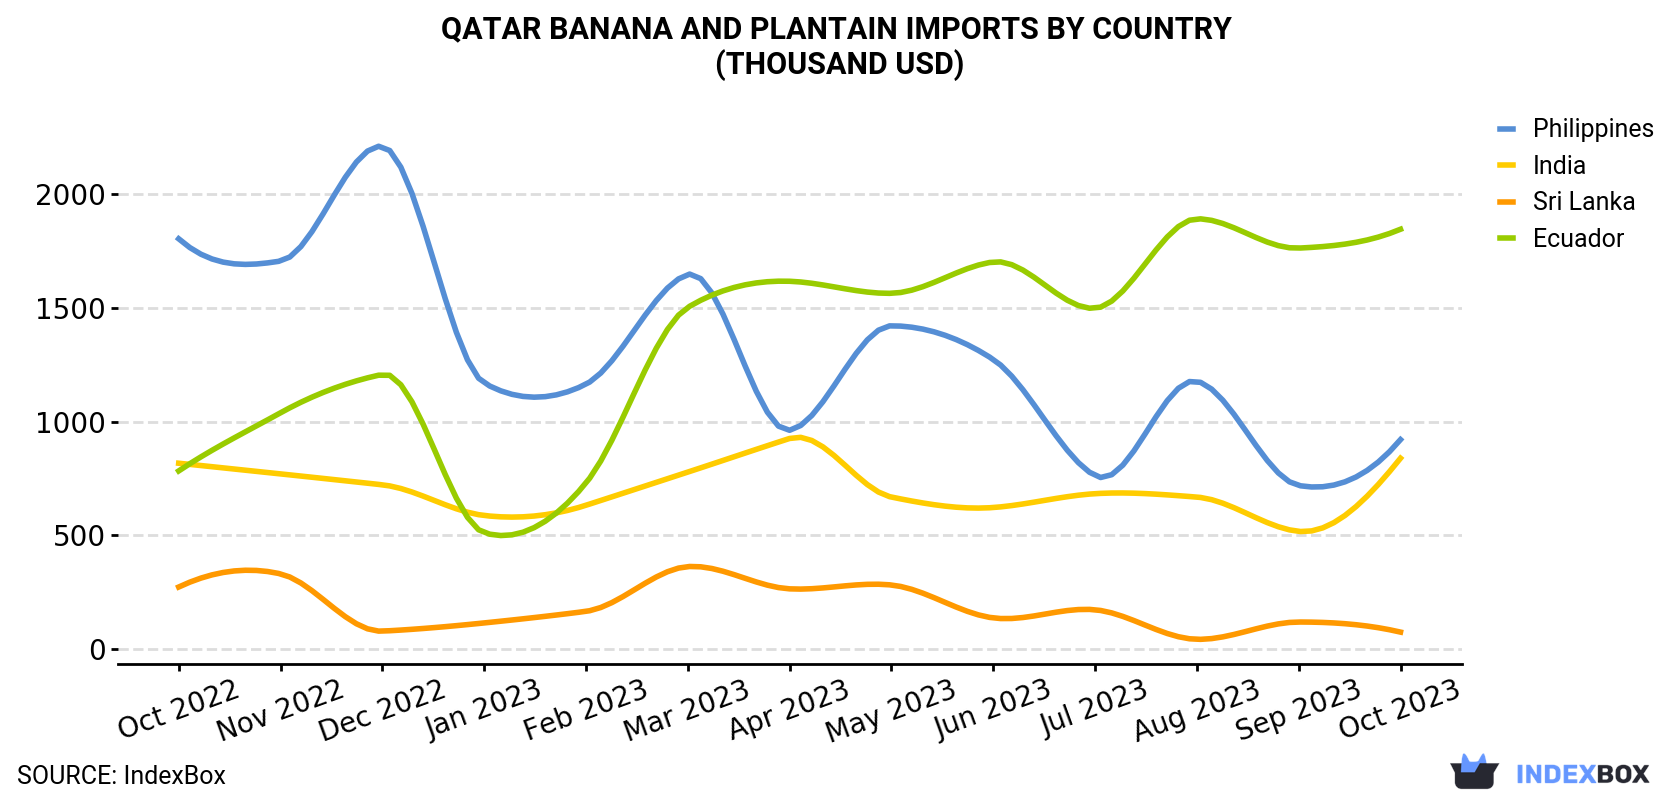 Qatar Banana and Plantain Imports By Country (Thousand USD)